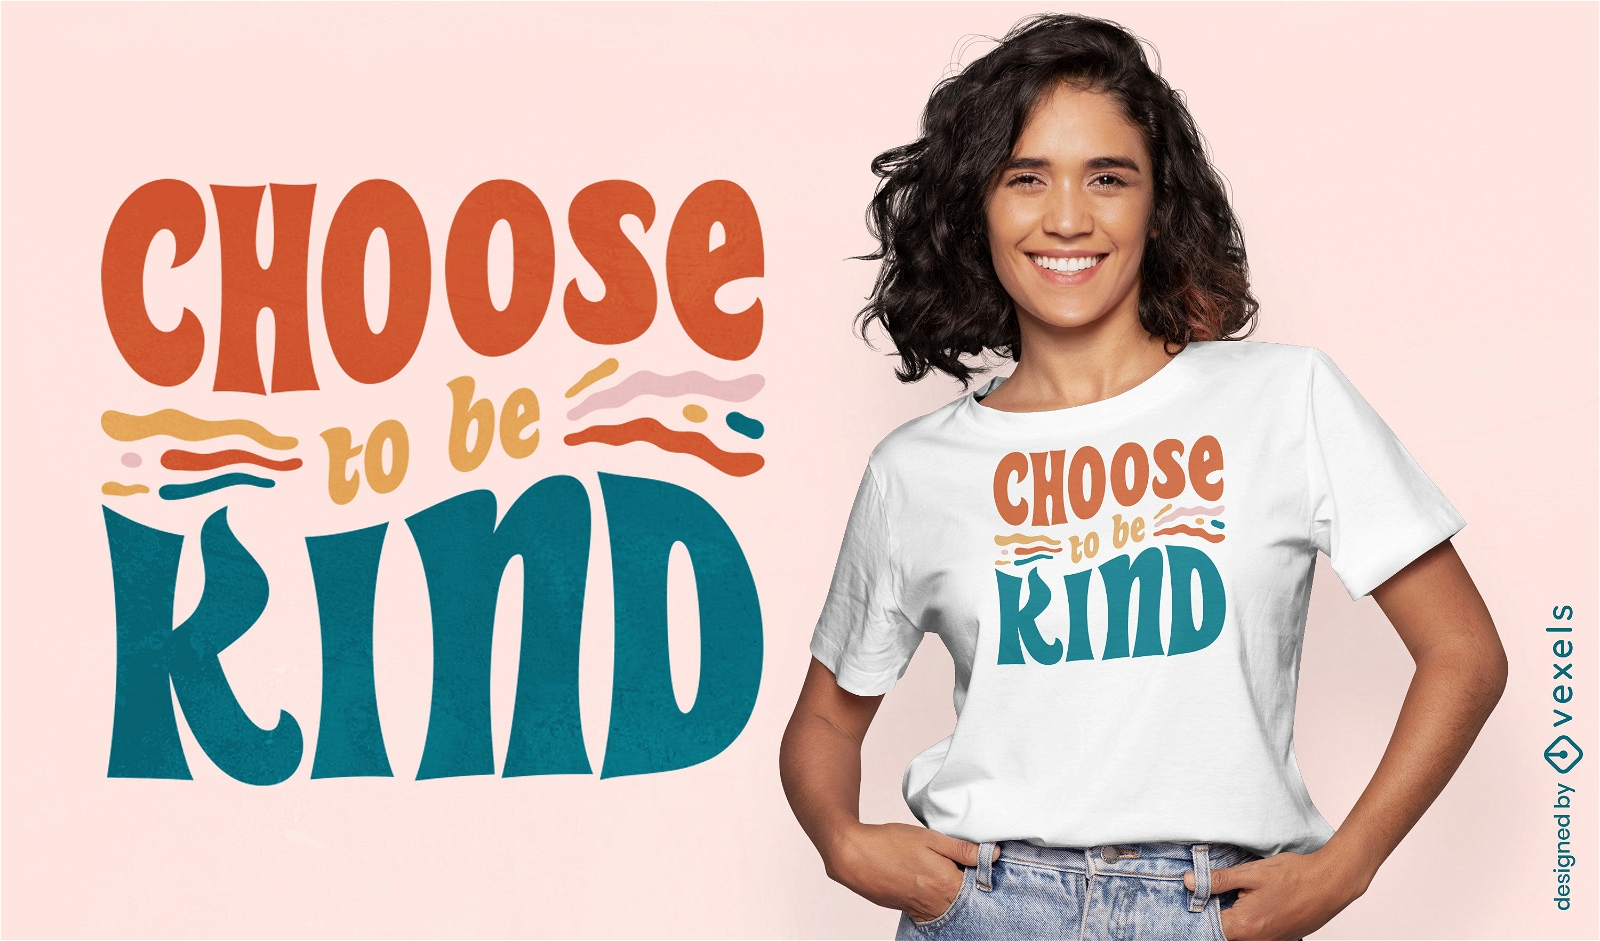 Choose to be kind positivity quote t-shirt design